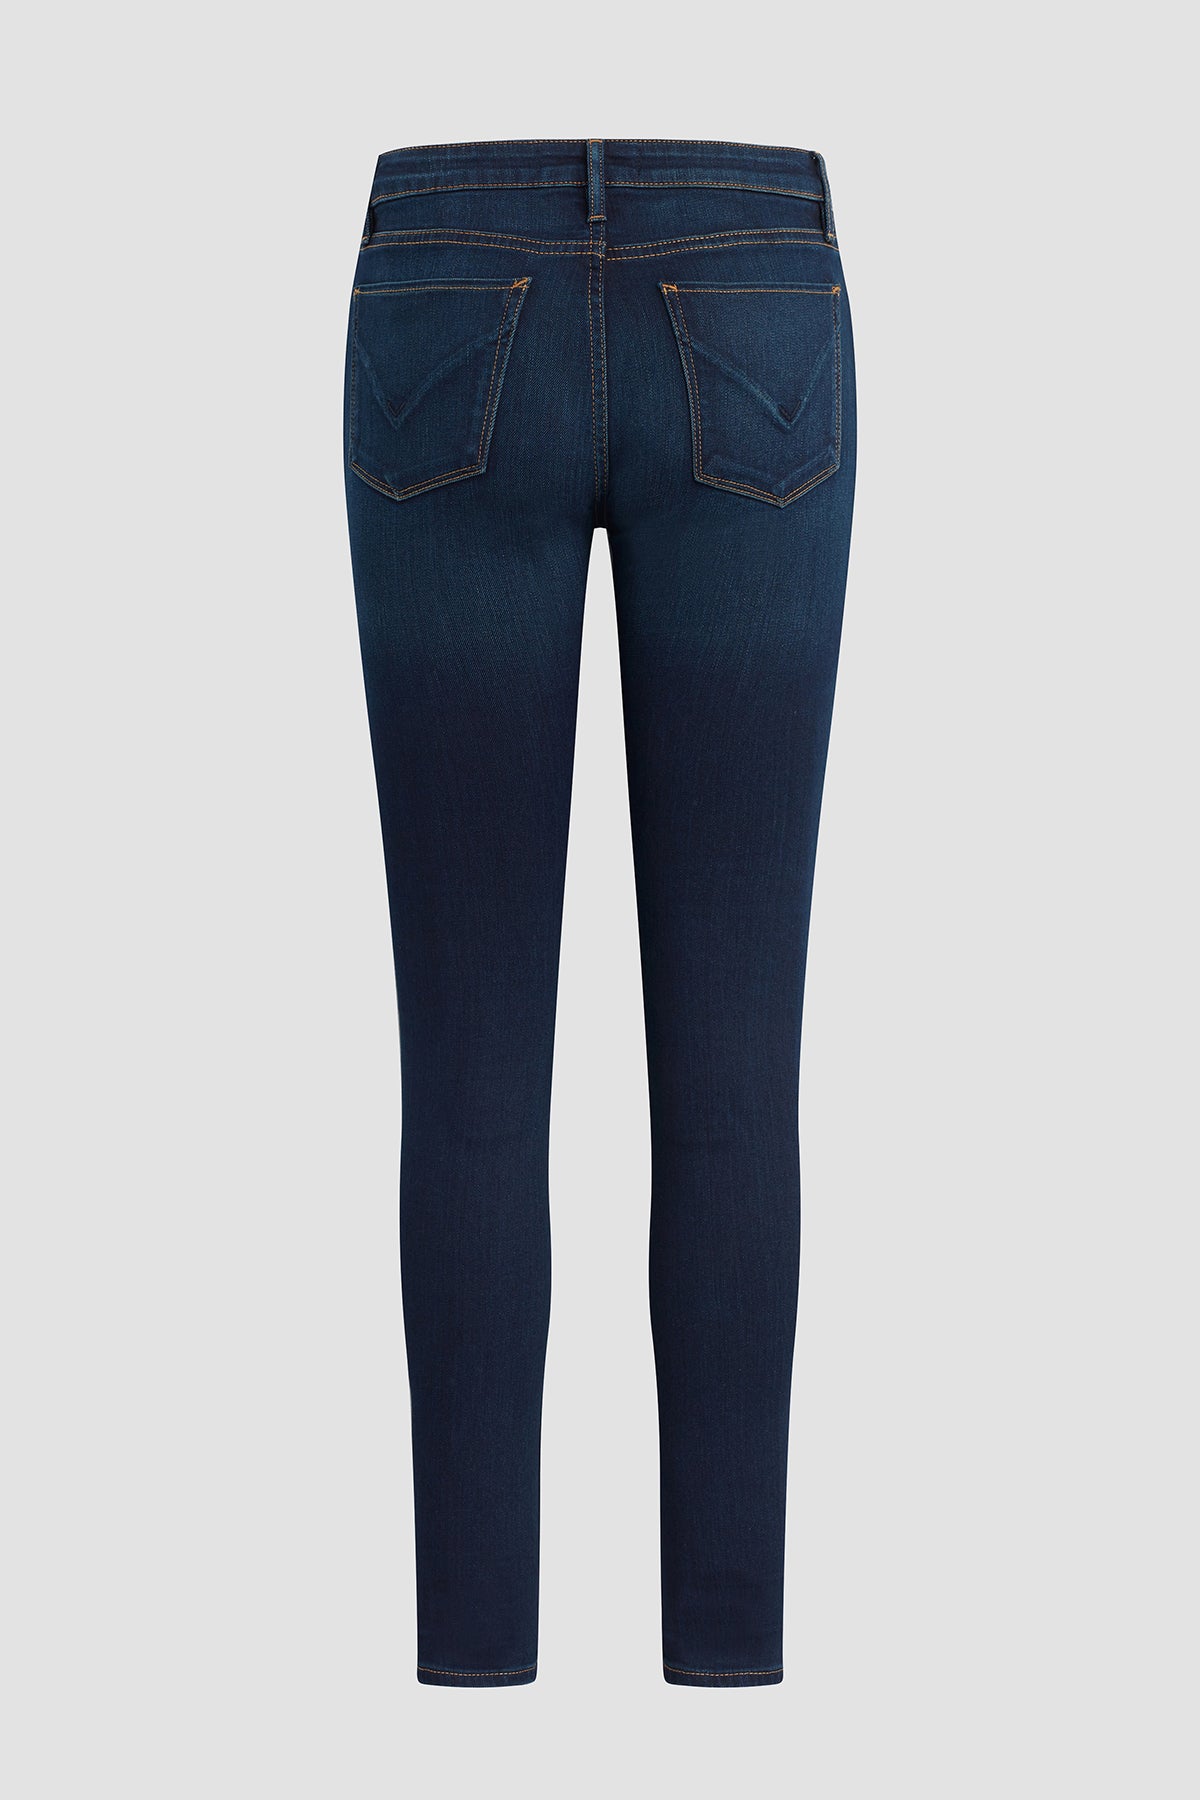 Women's Skinny Jeans – Levis India Store